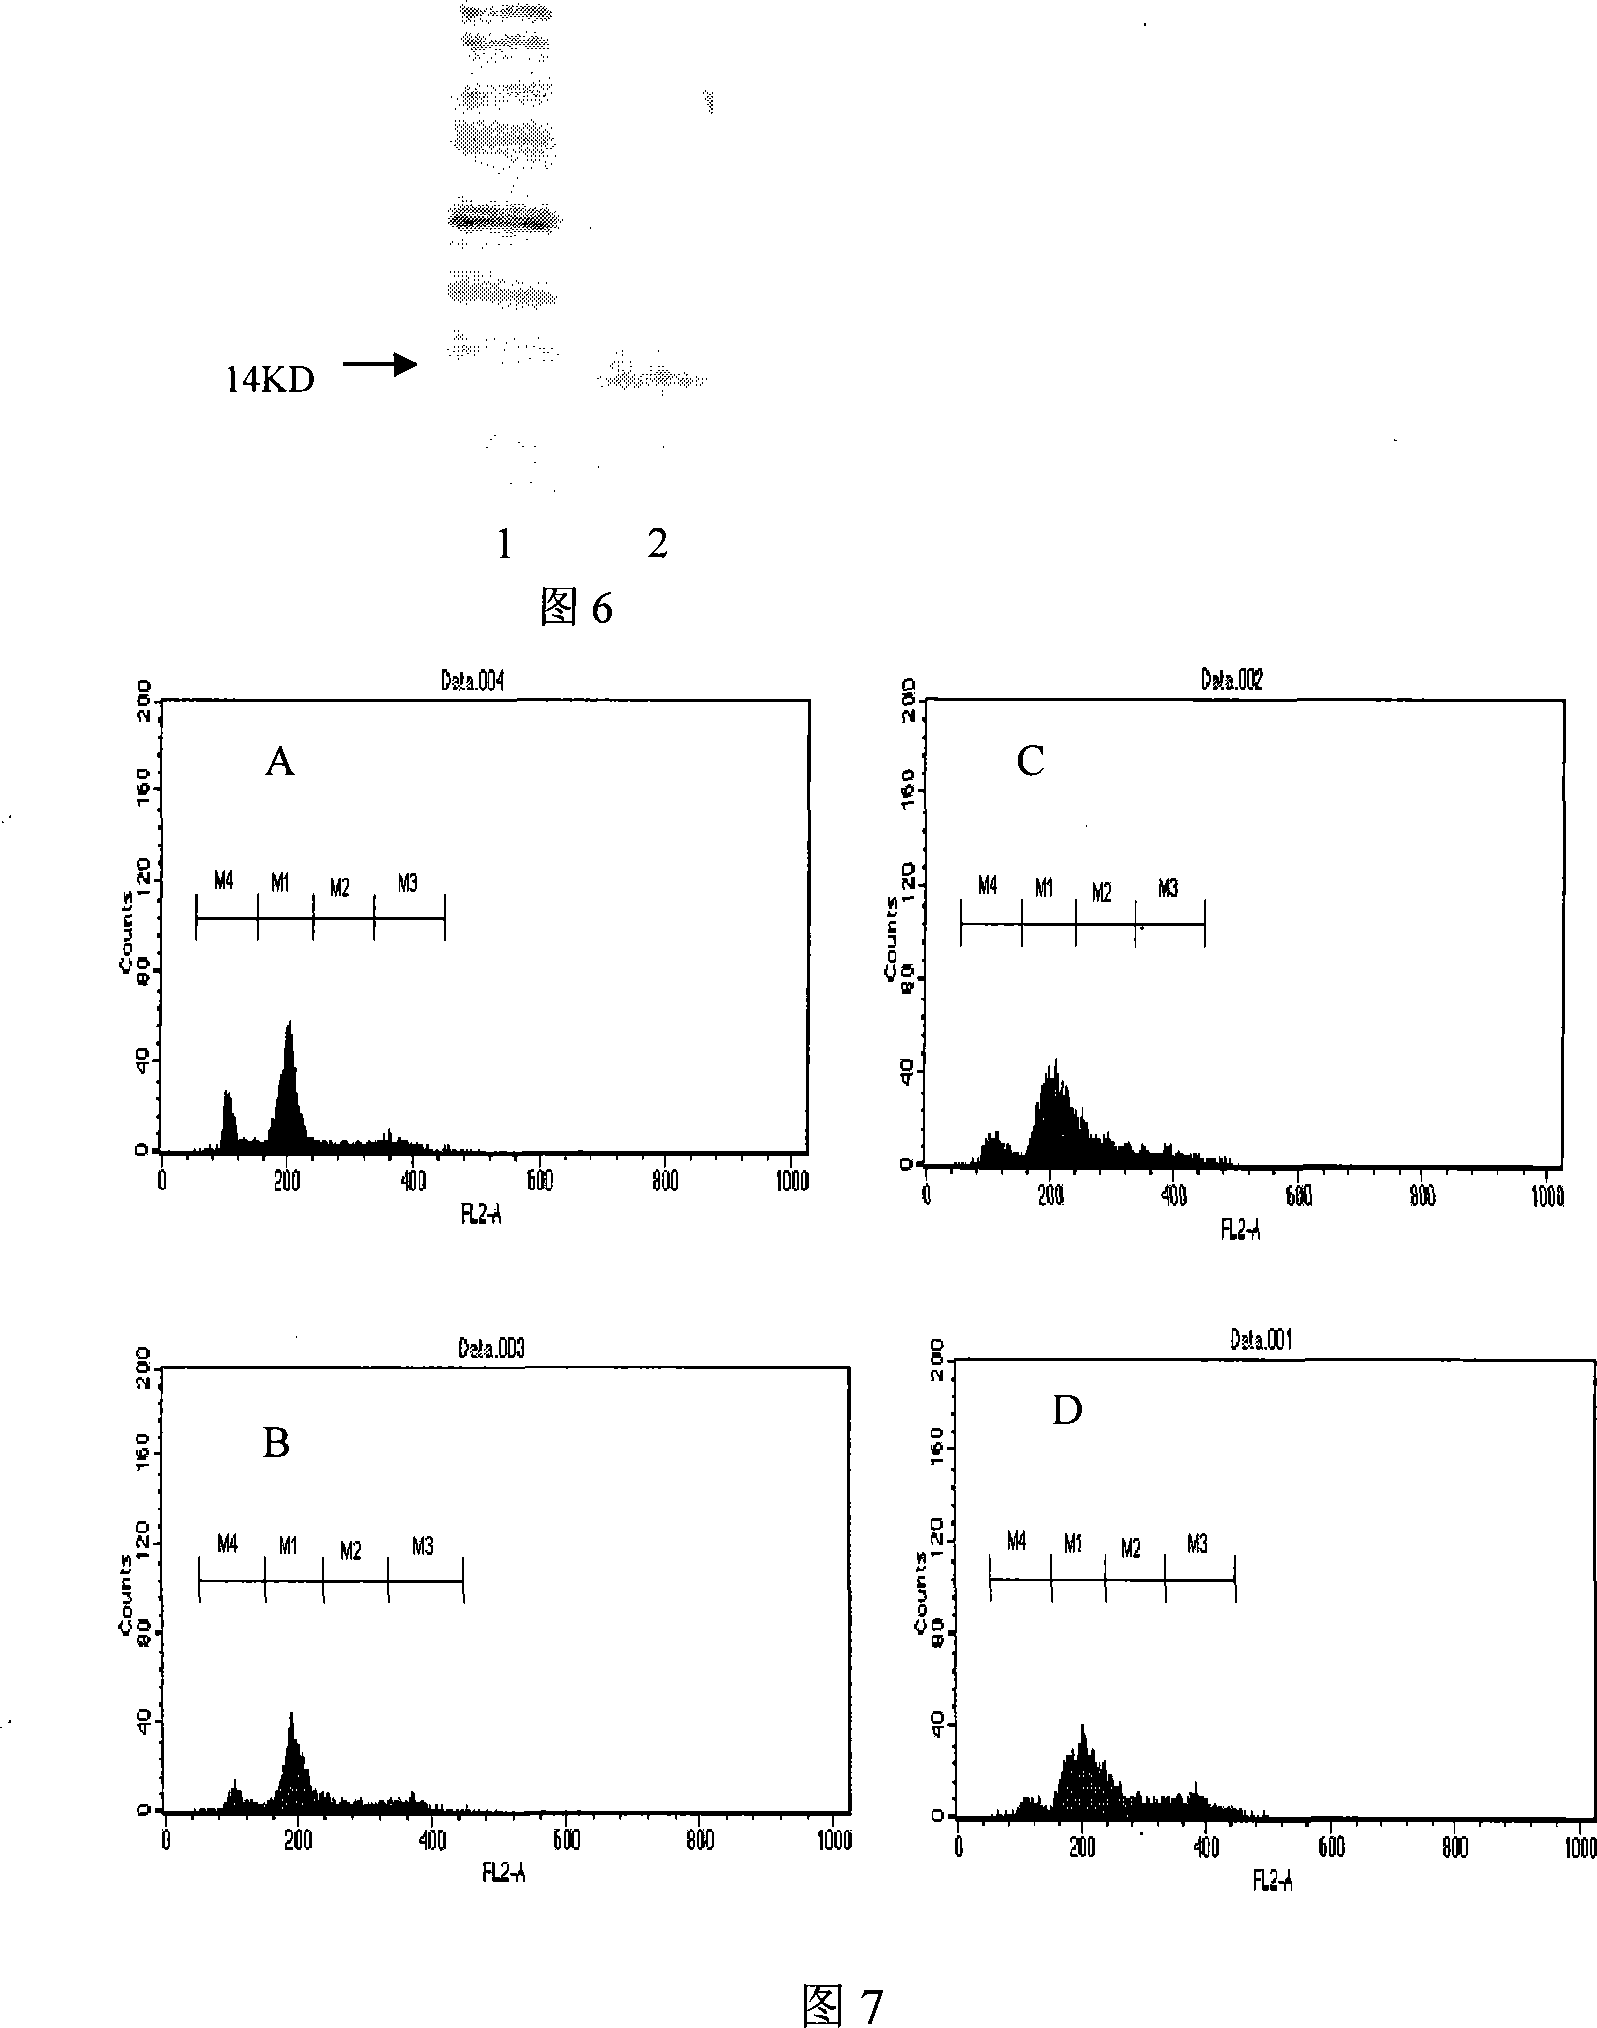 Recombinant polypeptide having islets beta- cell protection function